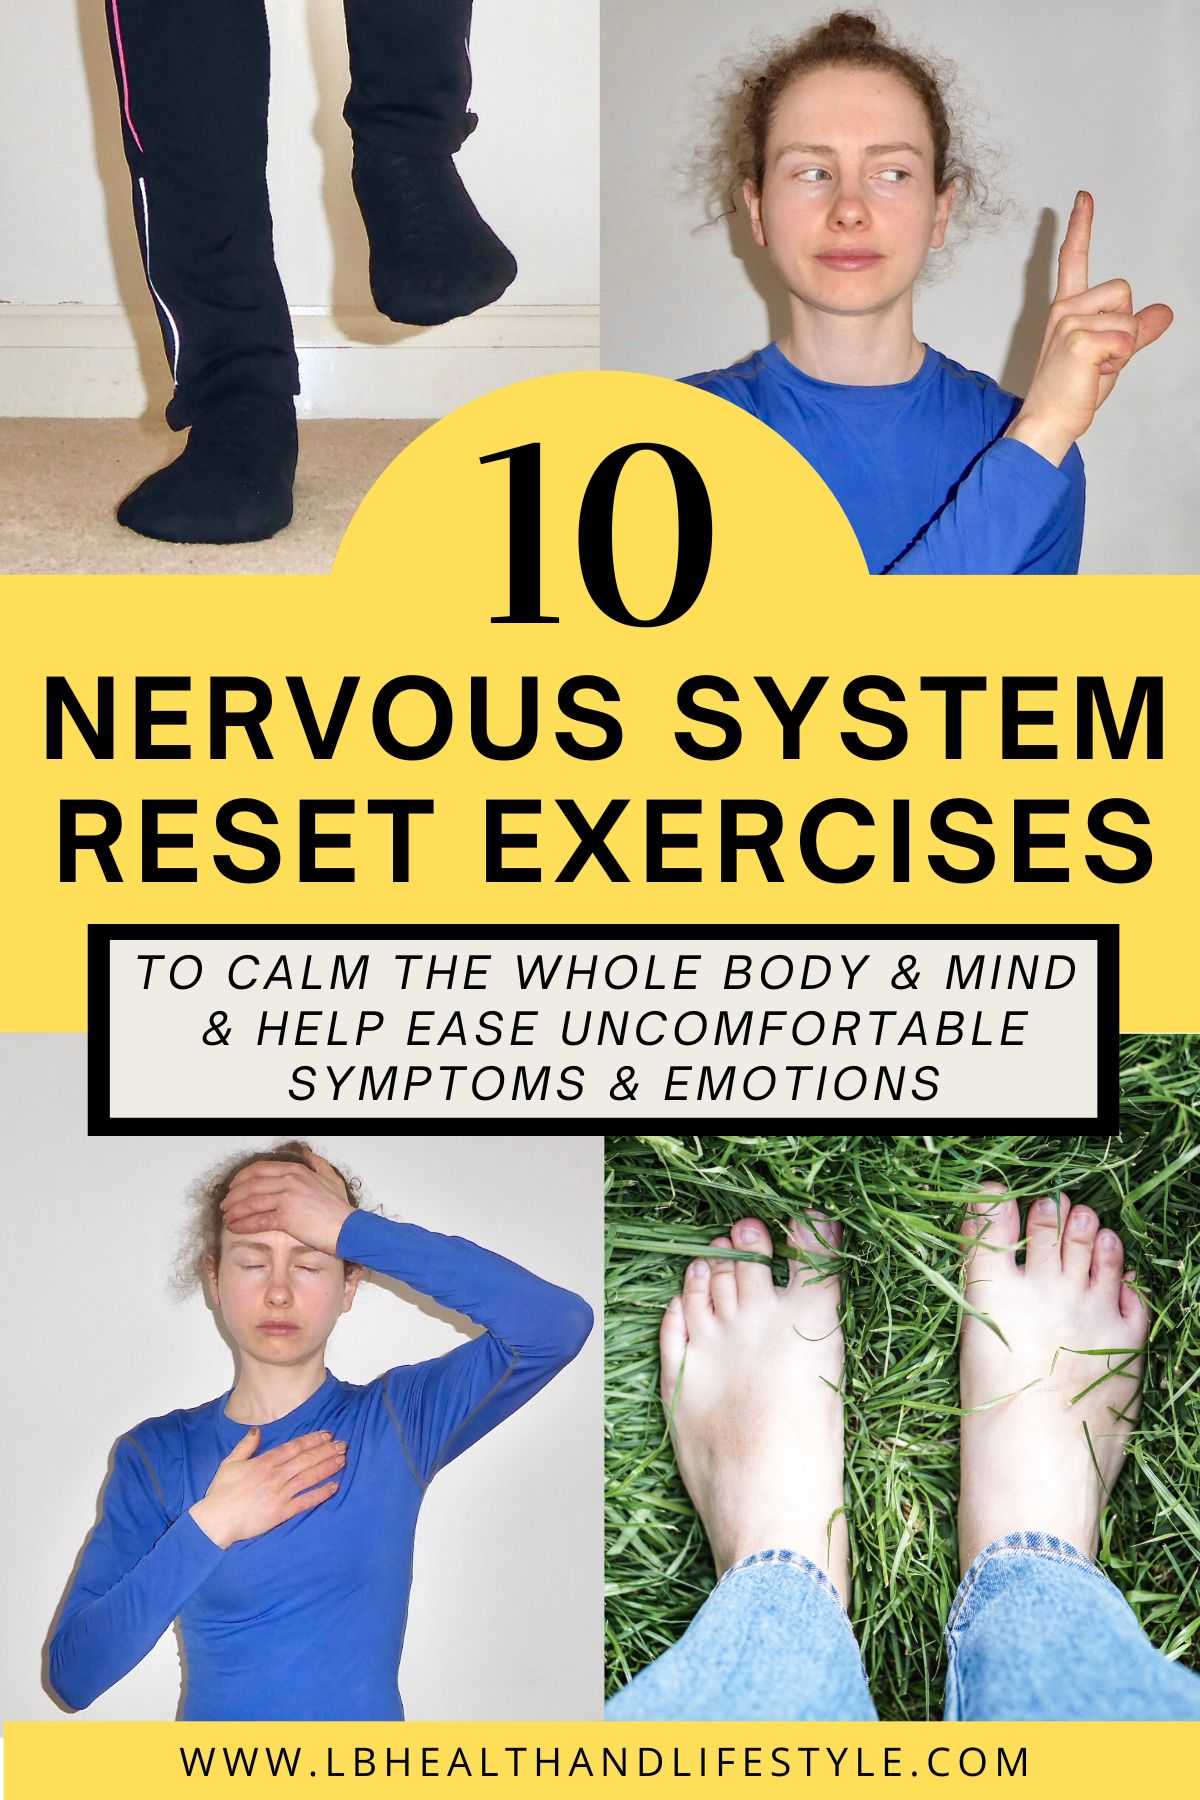 10 nervous system reset exercises to calm the whole body & mind